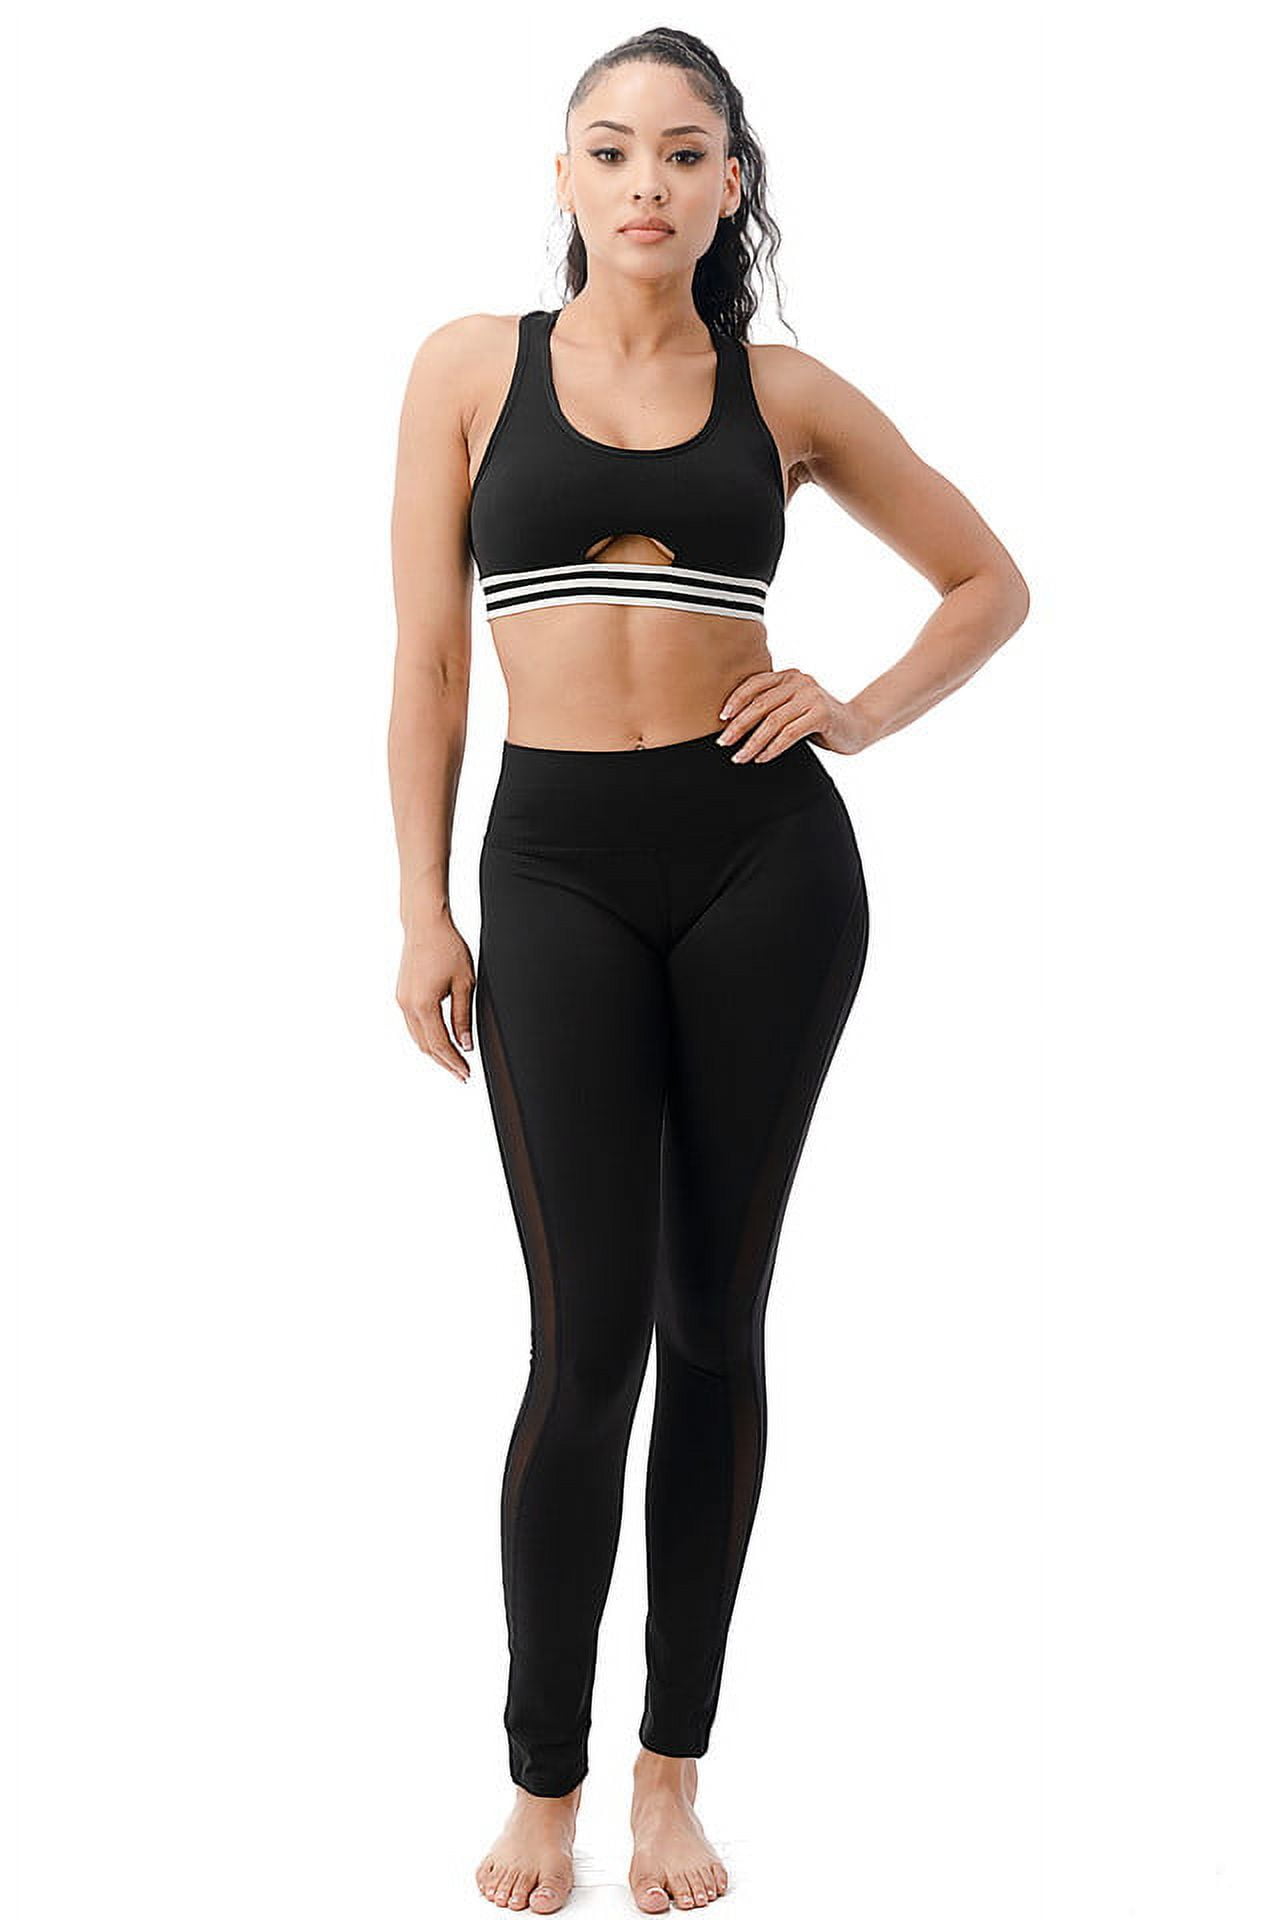 Hot Selling Athletic Wear Sports Legging Mesh Yoga Pants with Ankle Length,  Tummy Control Gym Workout Leggings with Mesh Insert Design for Women -  China Sports Mesh Yoga Pants and Athletic Wear